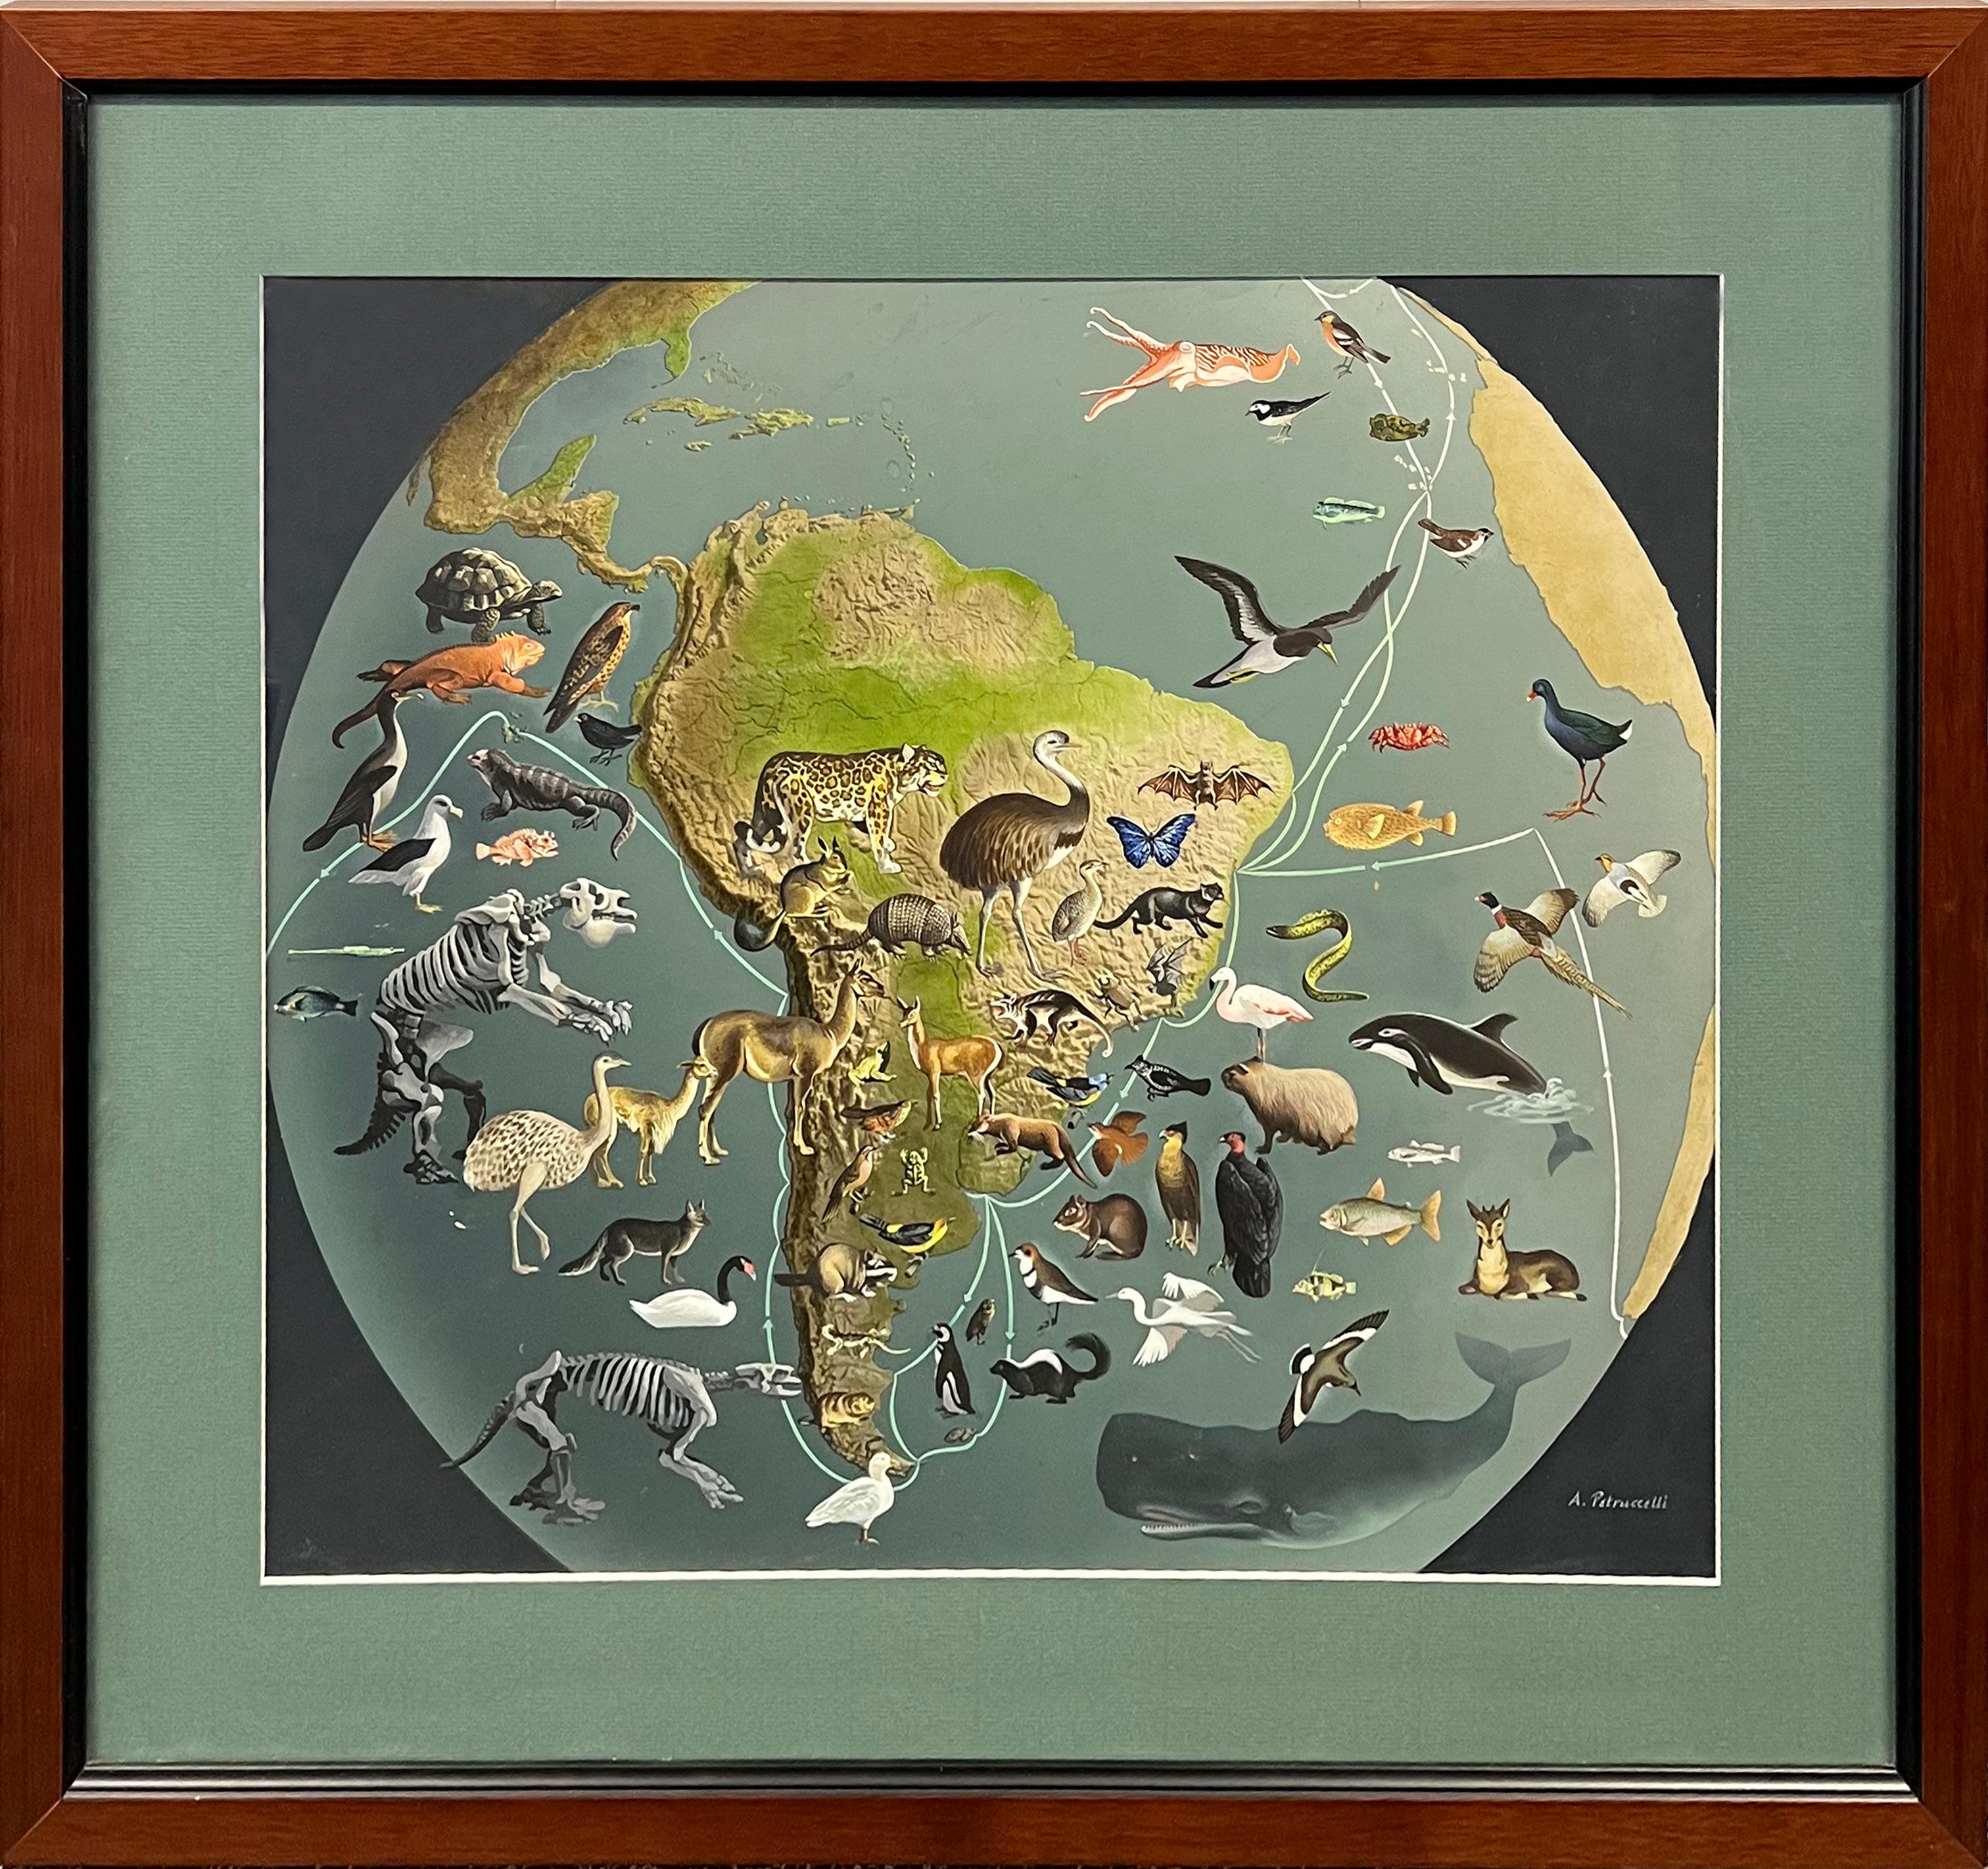 Original Painting S America Map Published 1956 Illustration Animals Planet Globe

Antonio Petruccelli (1907 – 1994)
The Wonders of Life on Earth
Earth South America
Holiday Magazine published, 1956
18 1/2 X 21 1/2 inches (sight)
Framed 26 X 29